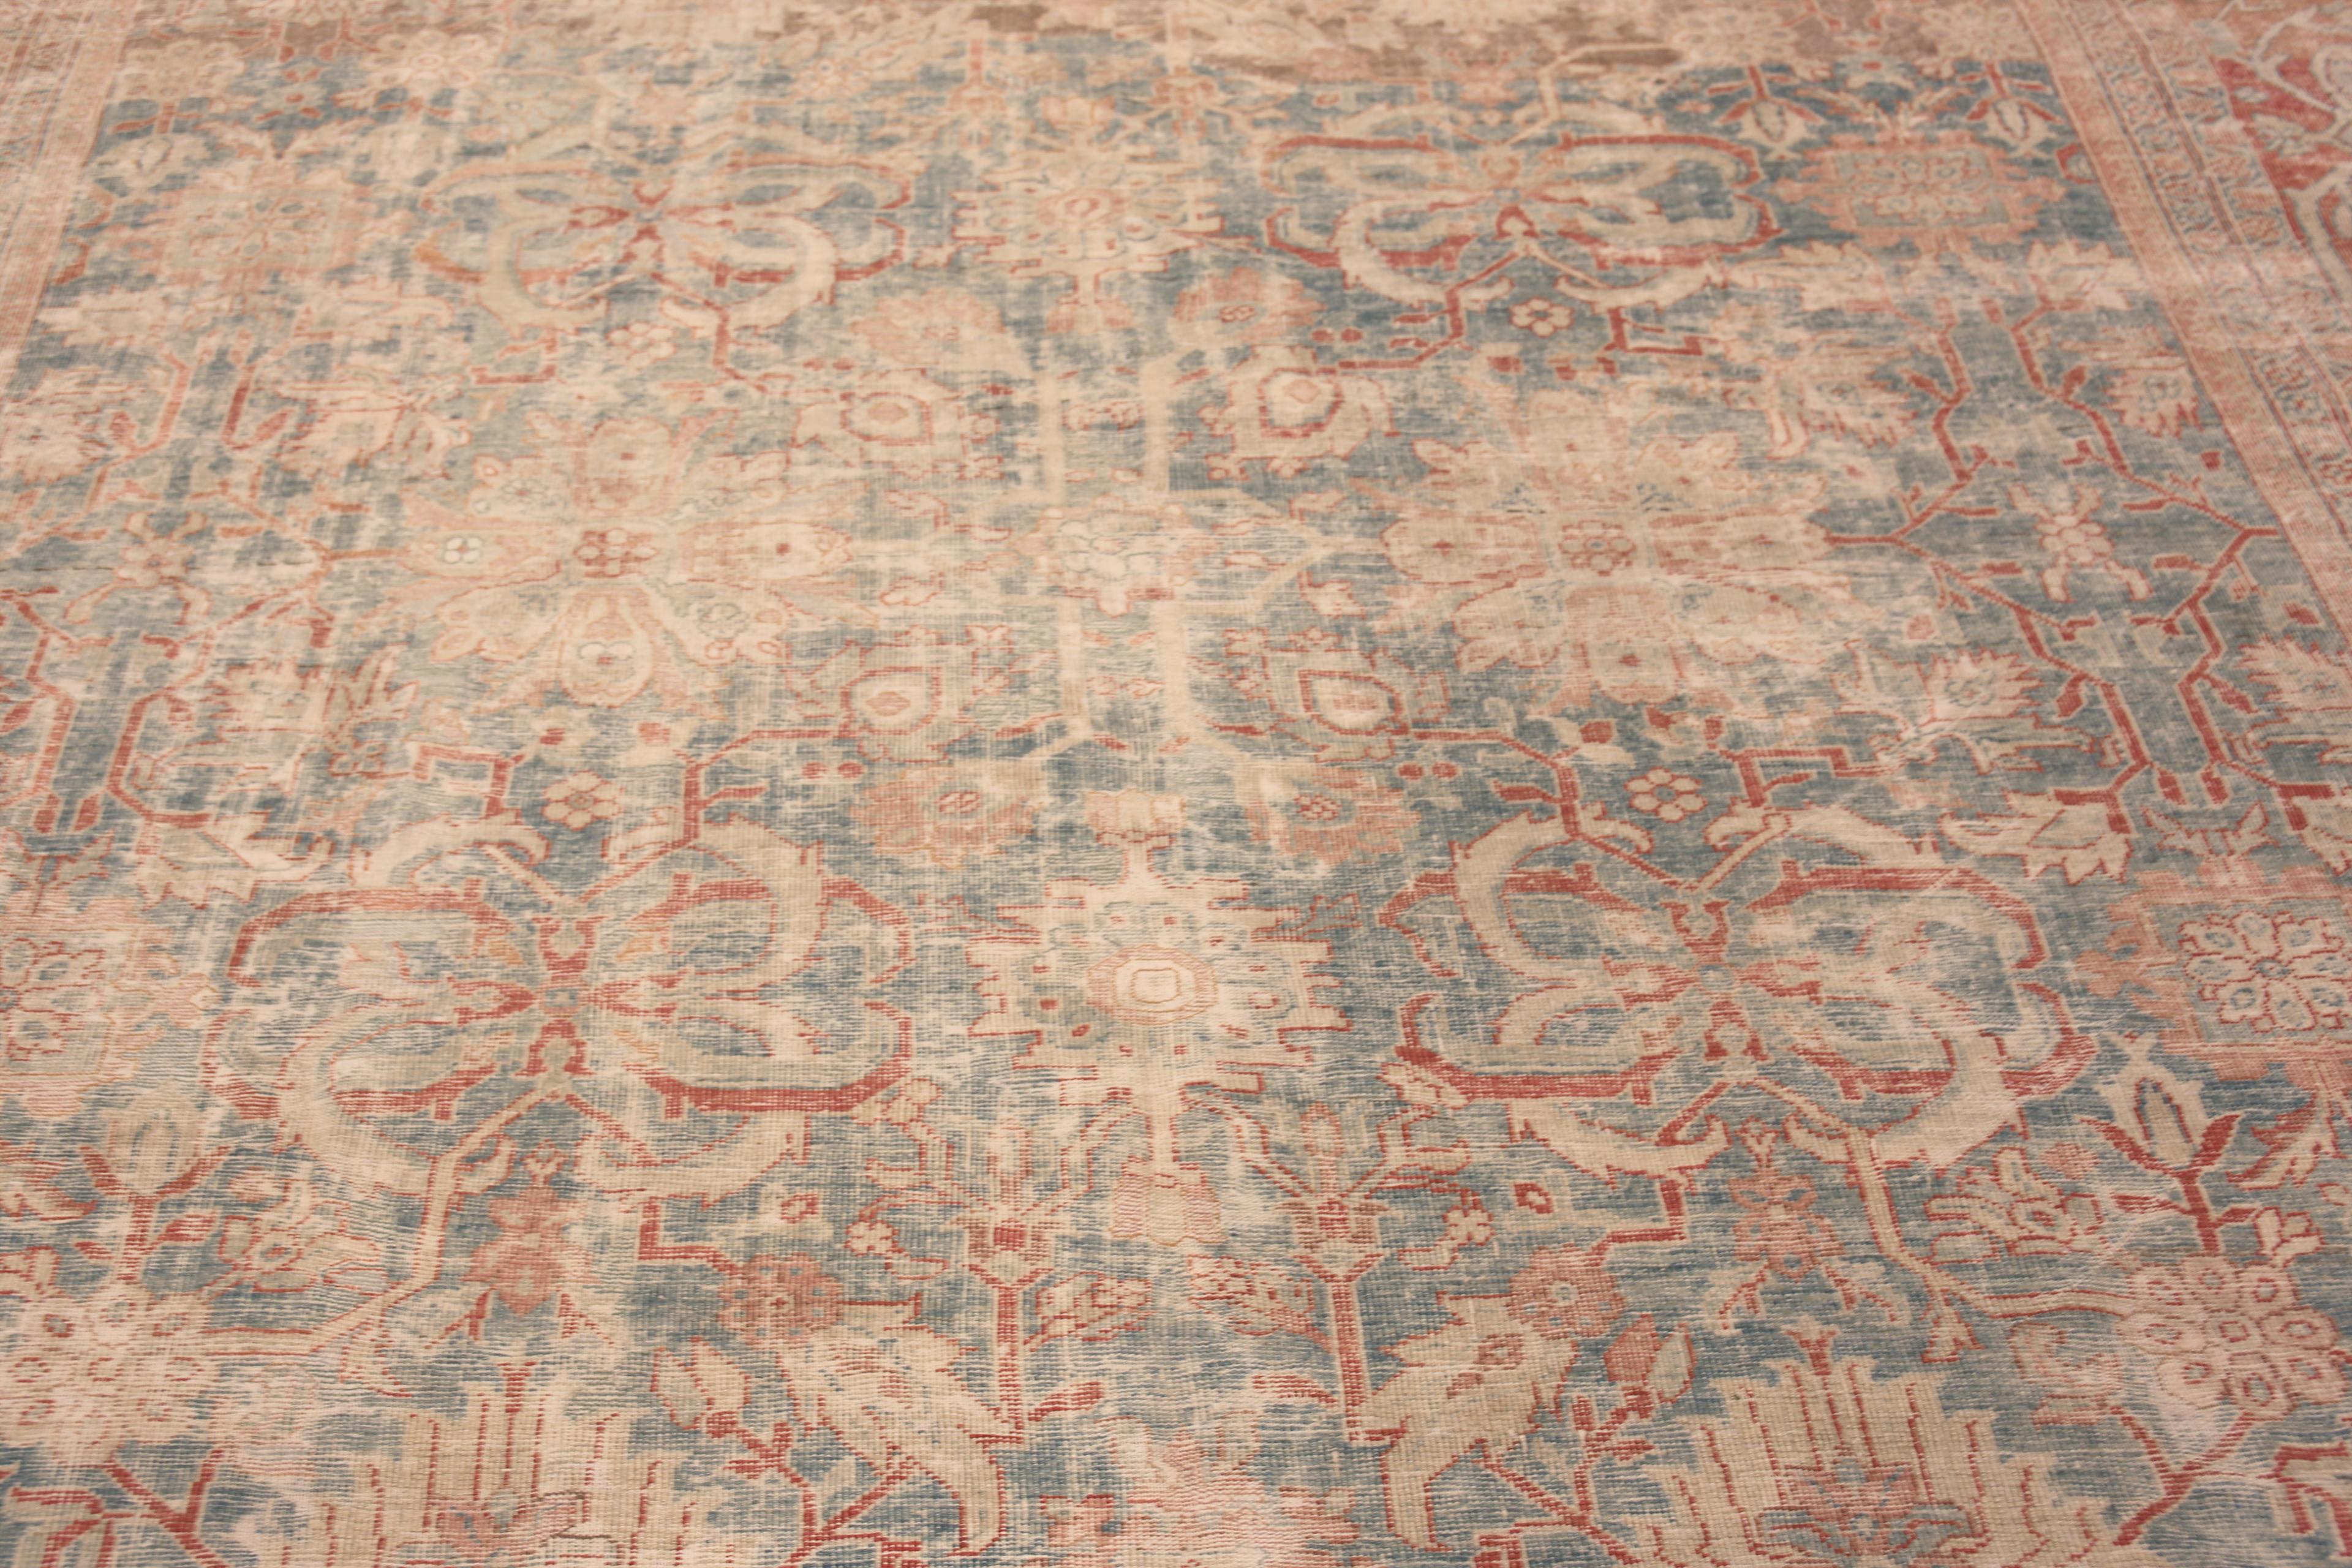 Hand-Knotted Large Decorative Antique Persian Shabby Chic Sultanabad Rug 11' x 17' For Sale